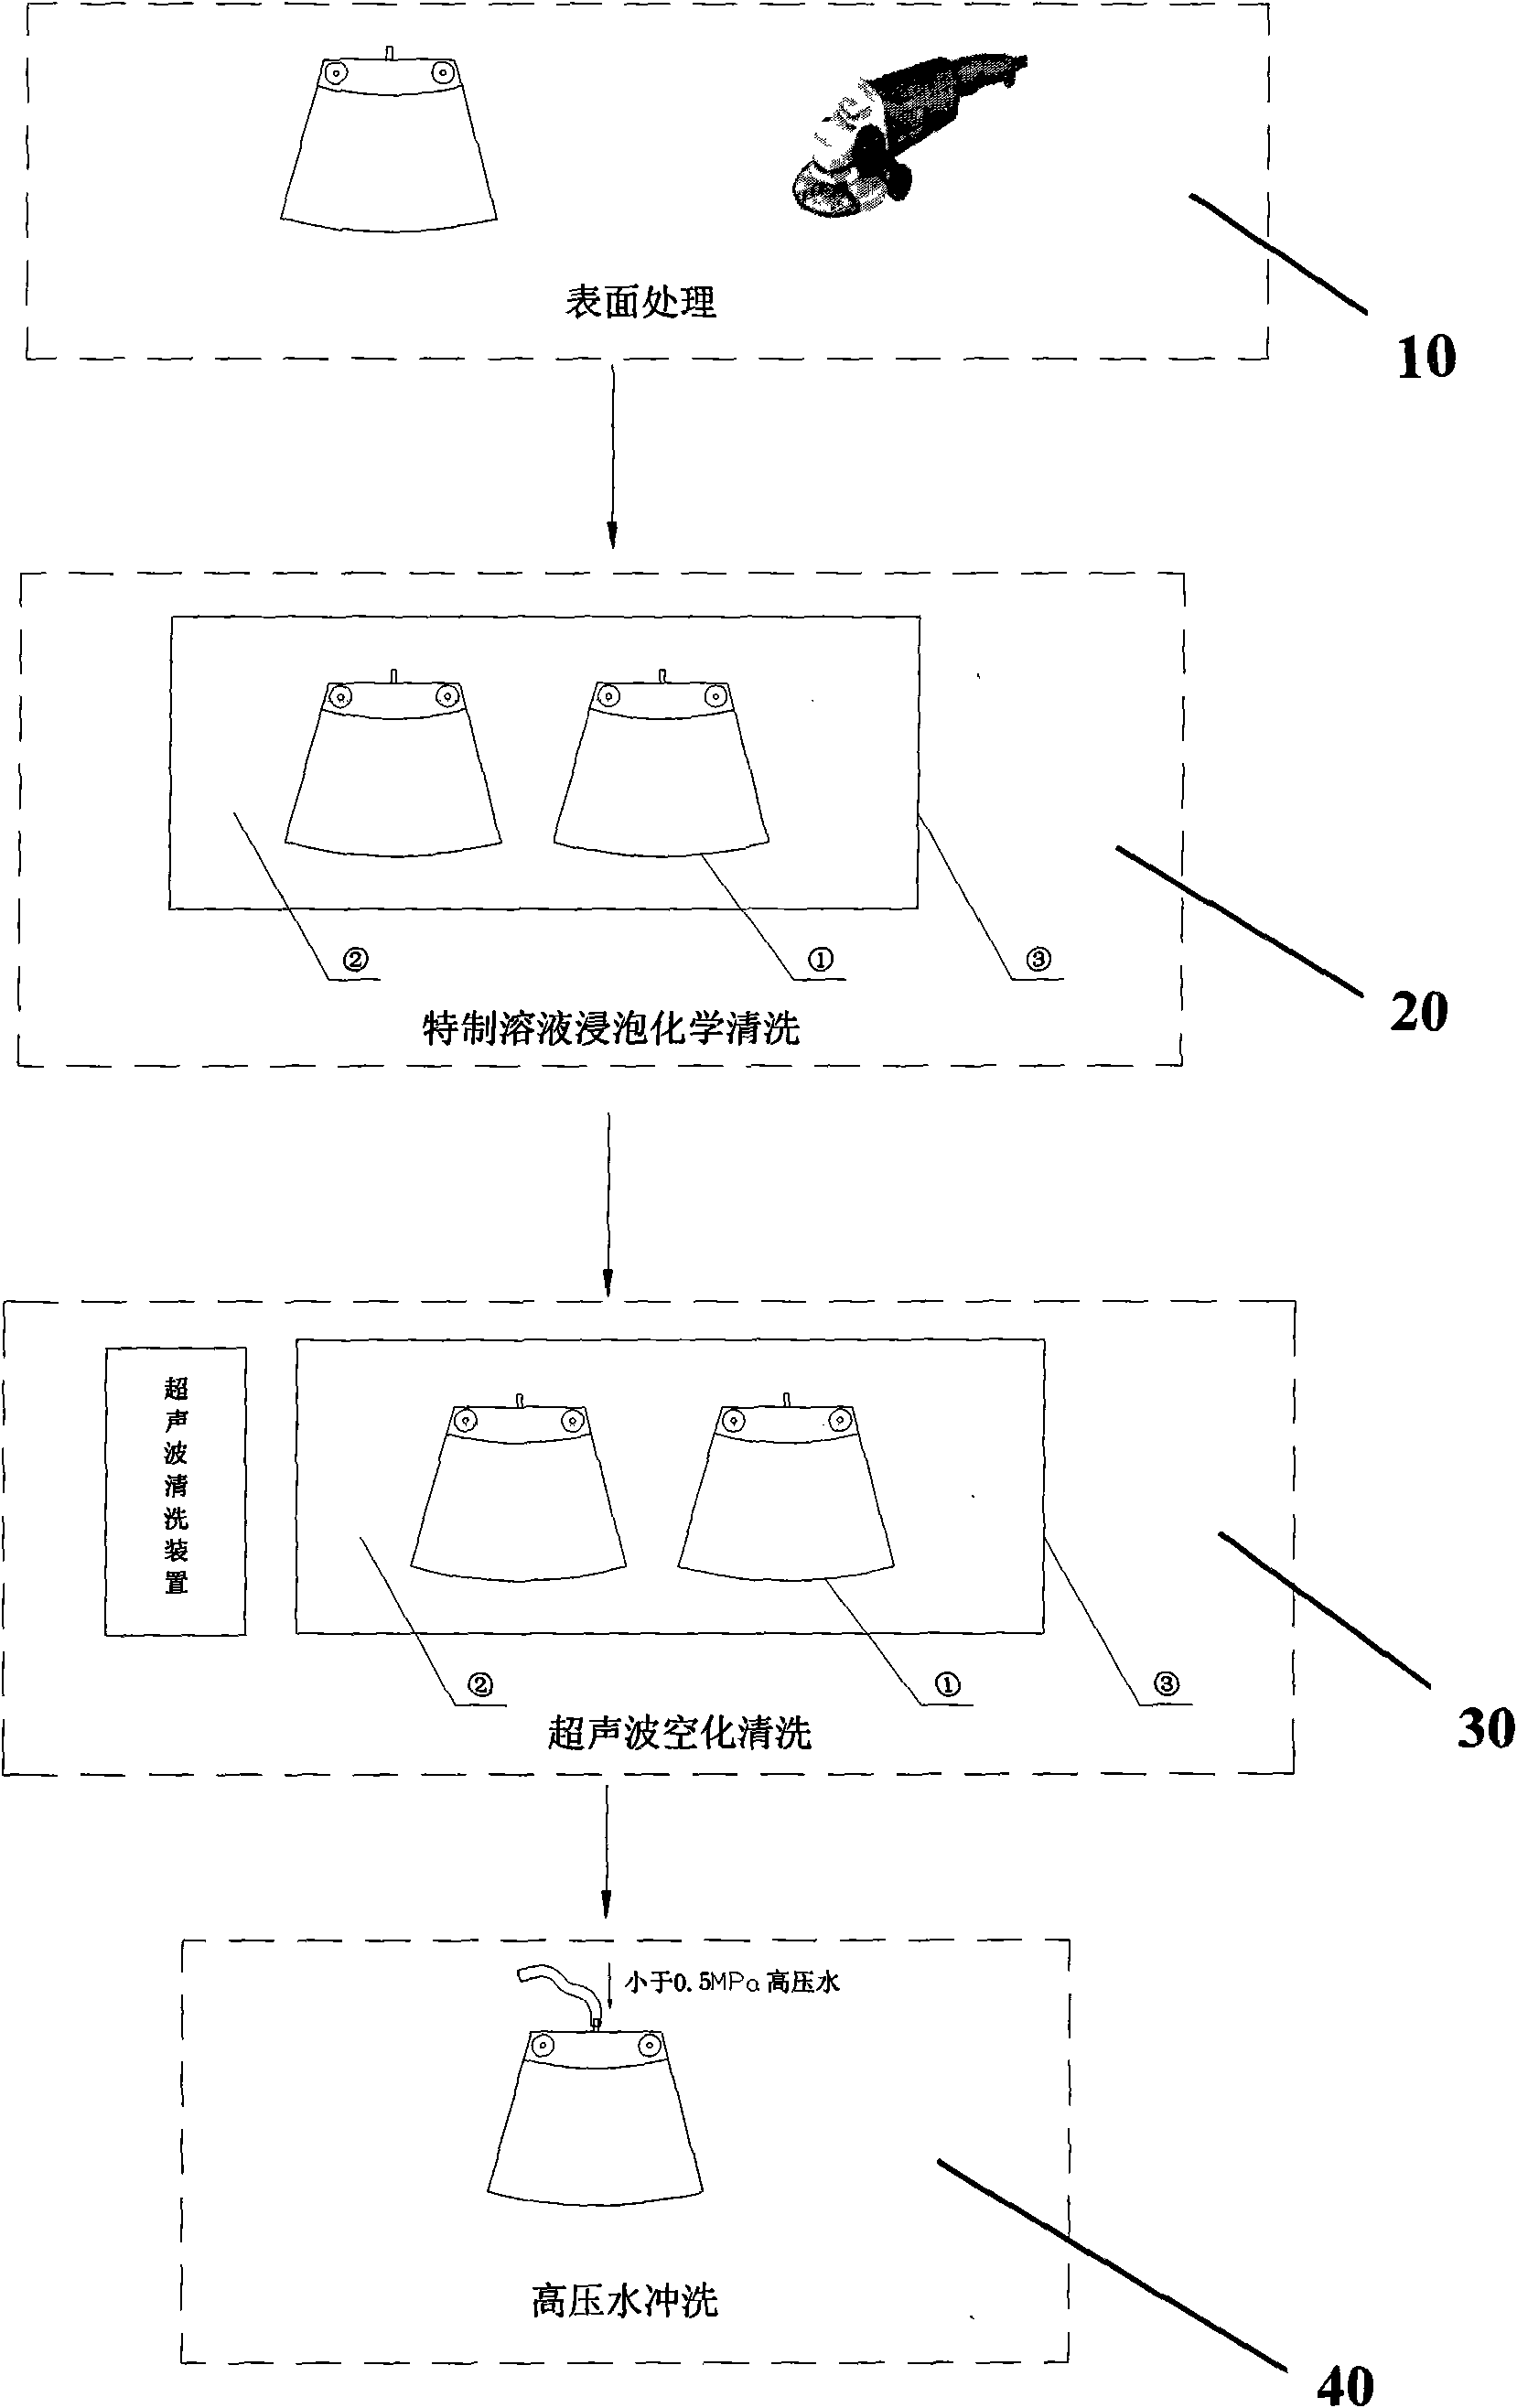 Method for cleaning ceramic filter plate of ceramic filter